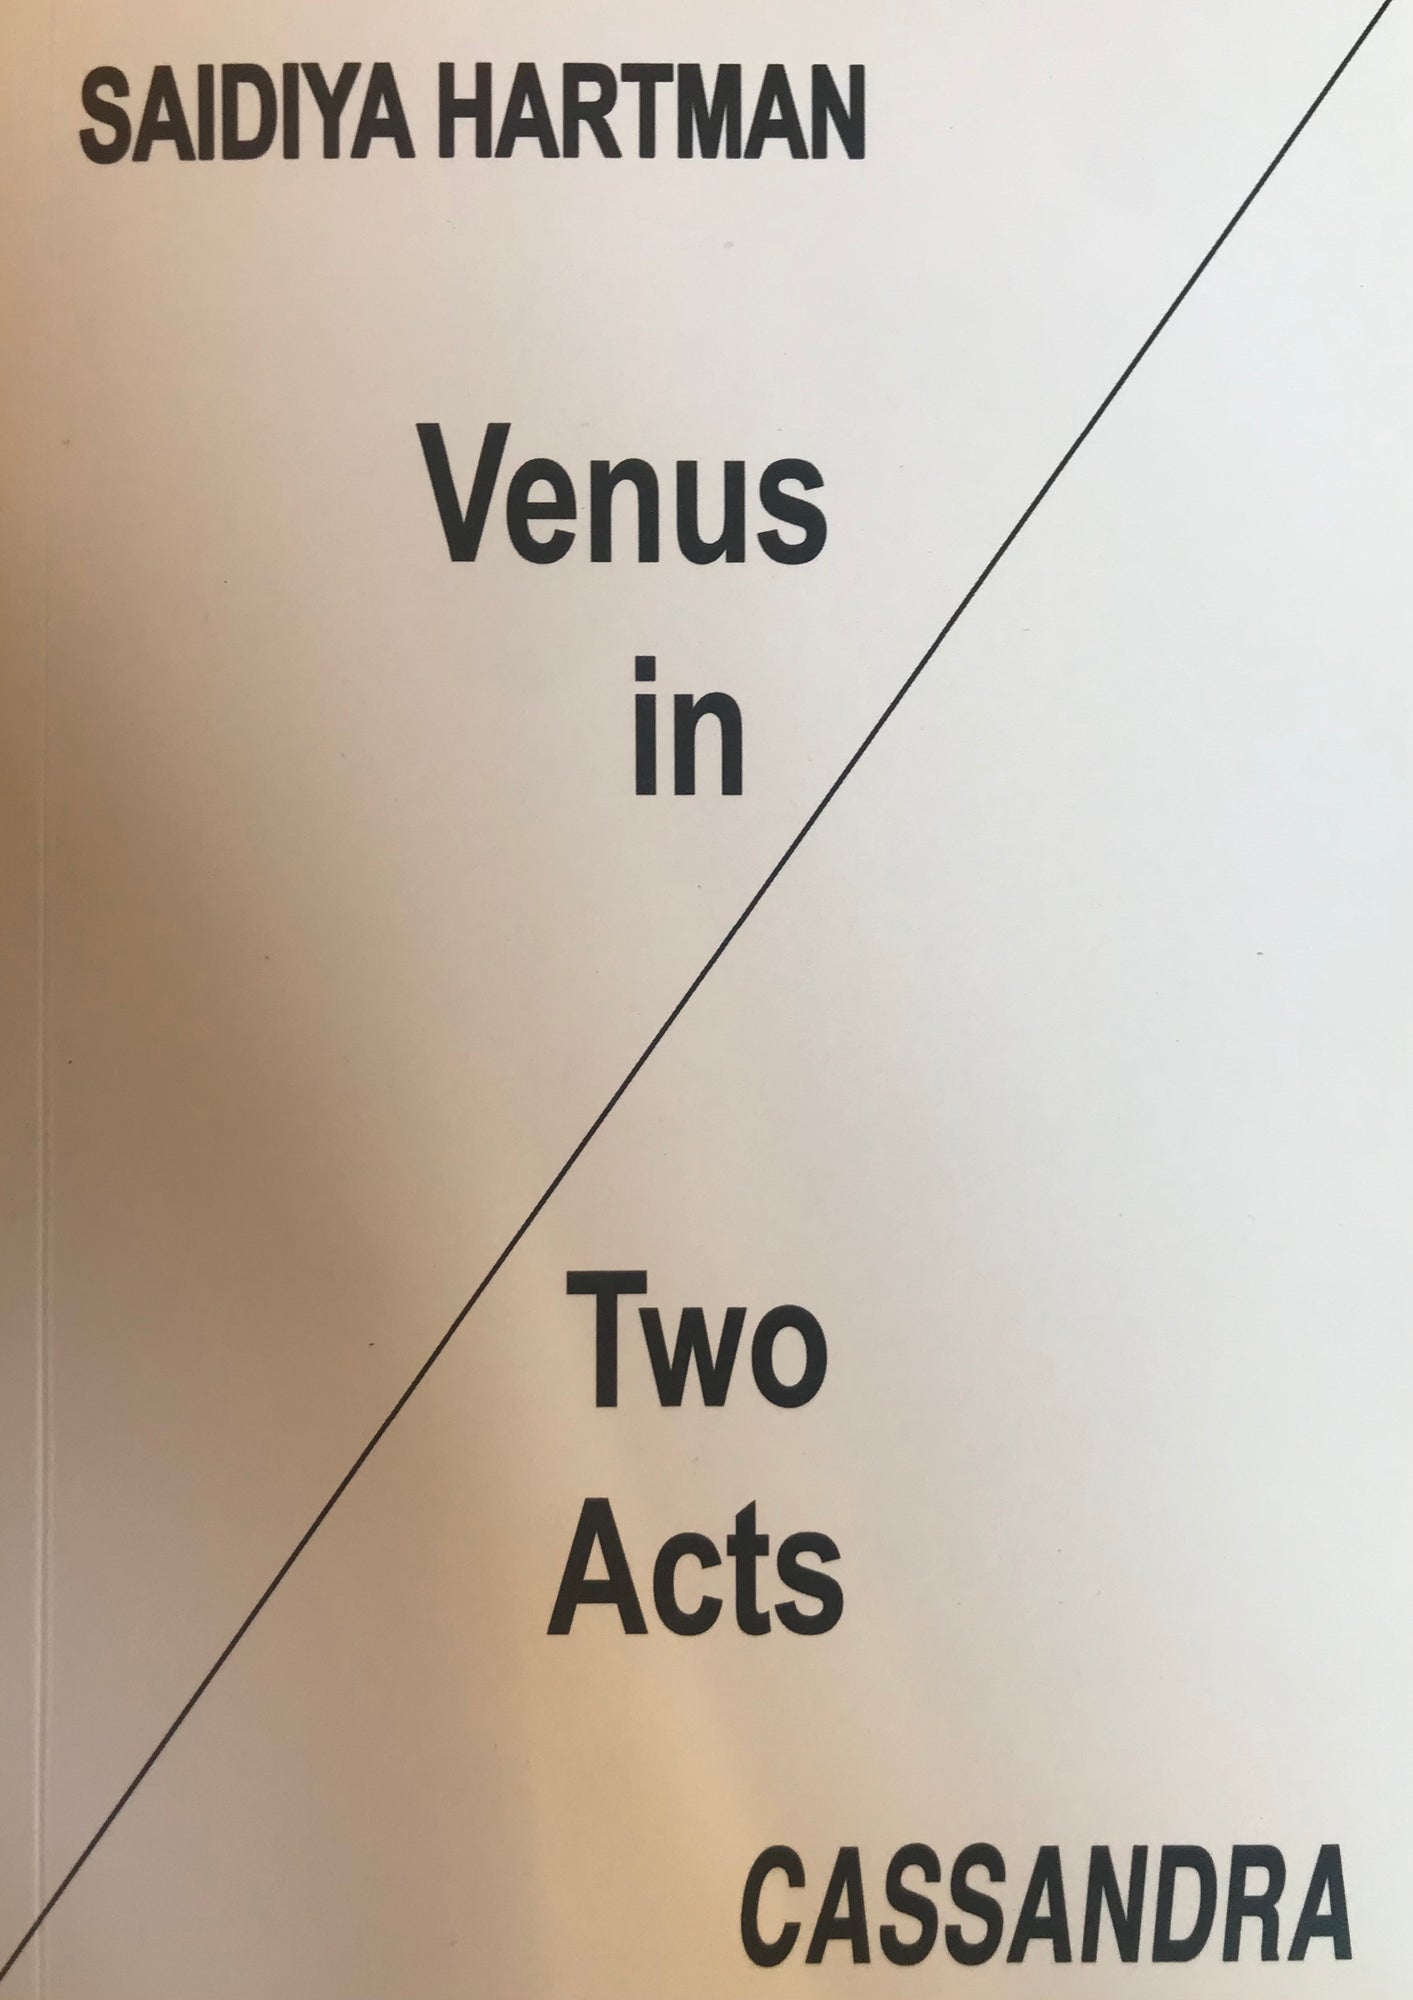 Venus in Two Acts